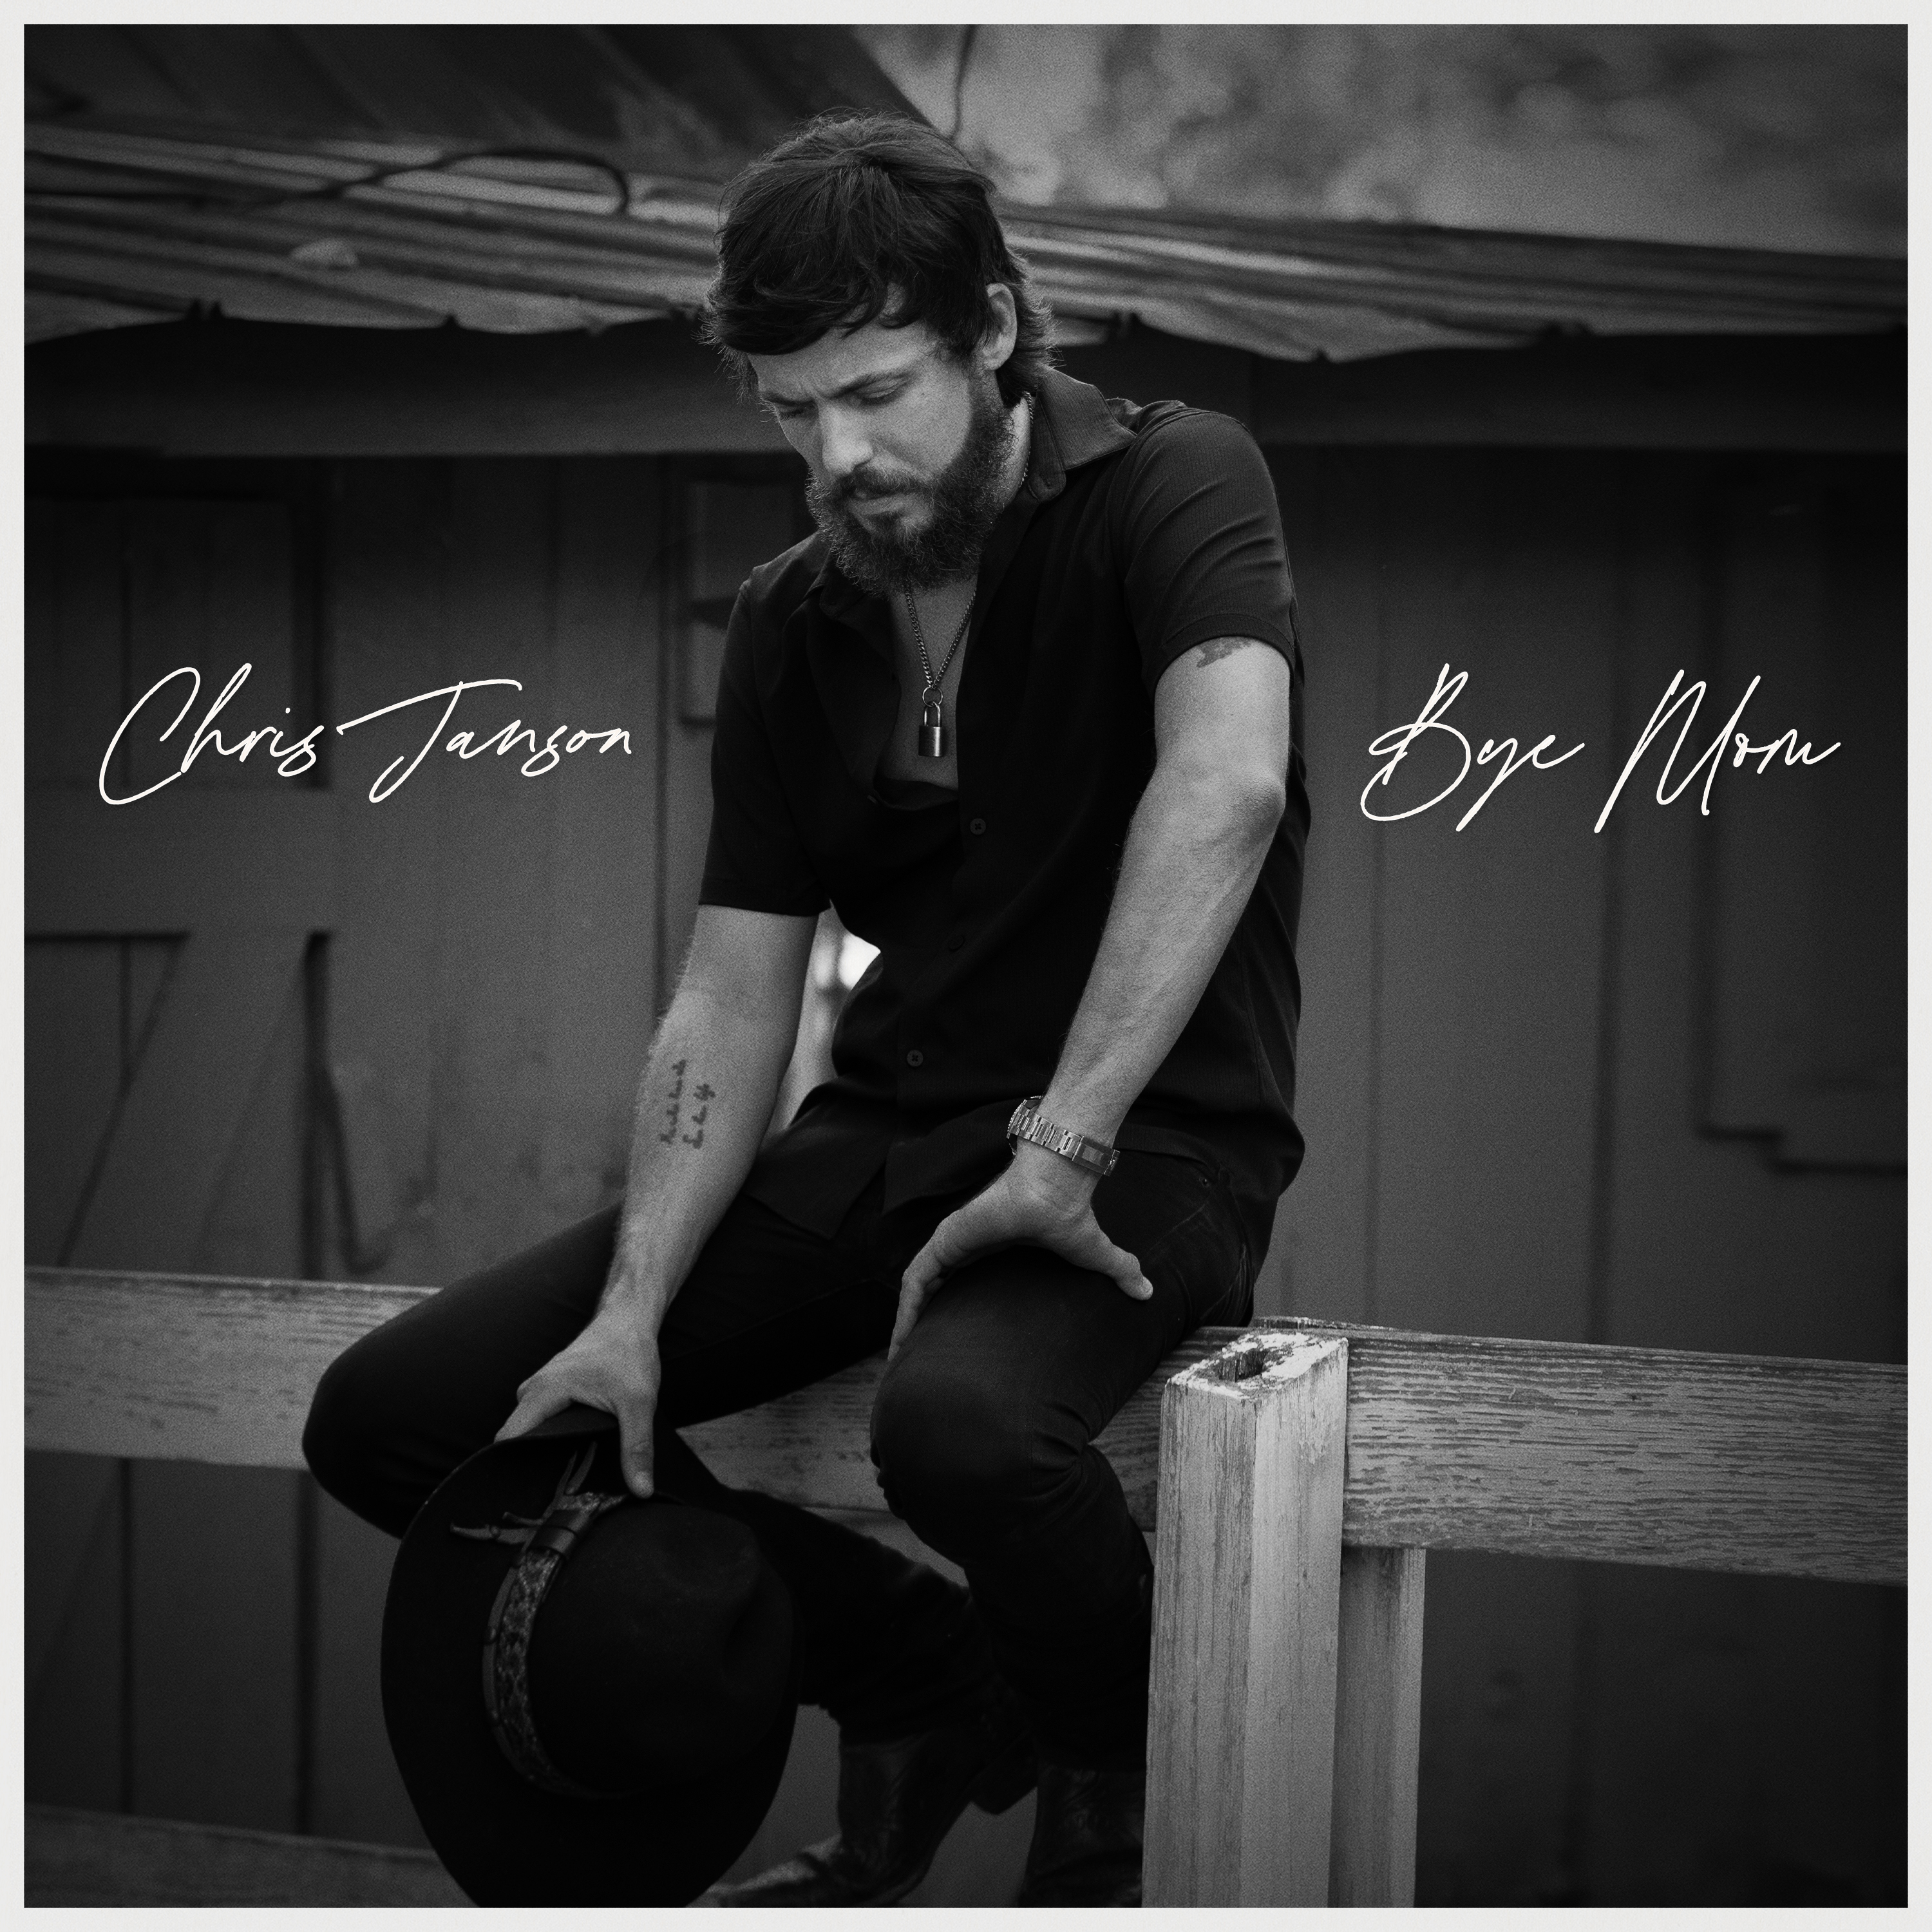 CHRIS JANSON SHARES TESTAMENT TO UNCONDITIONAL LOVE IN NEW SINGLE “BYE MOM”